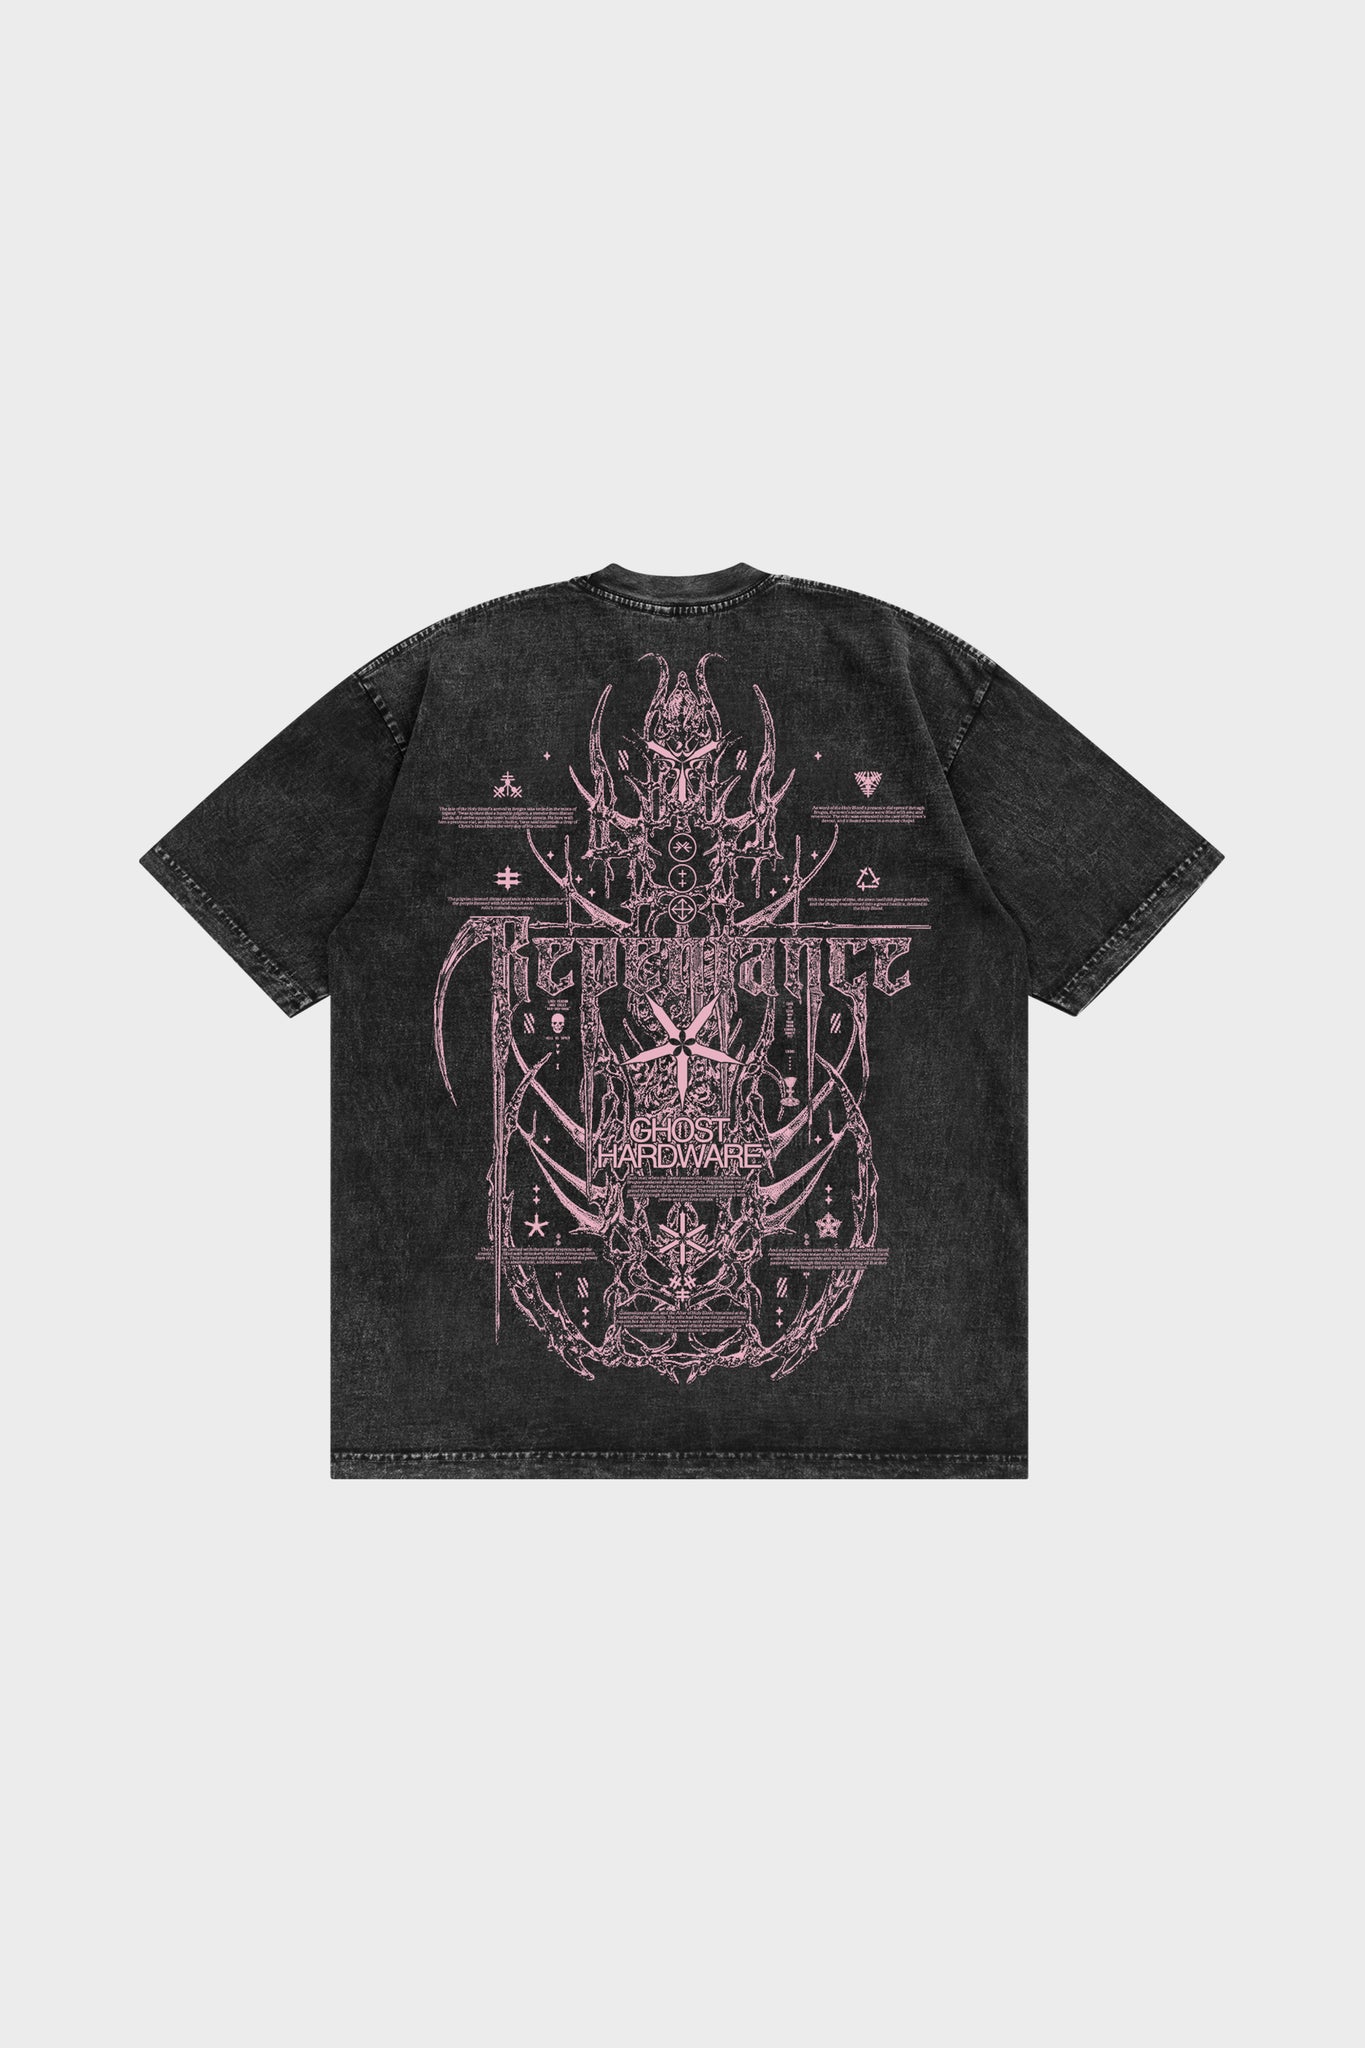 Repentance [ patch ] Tee